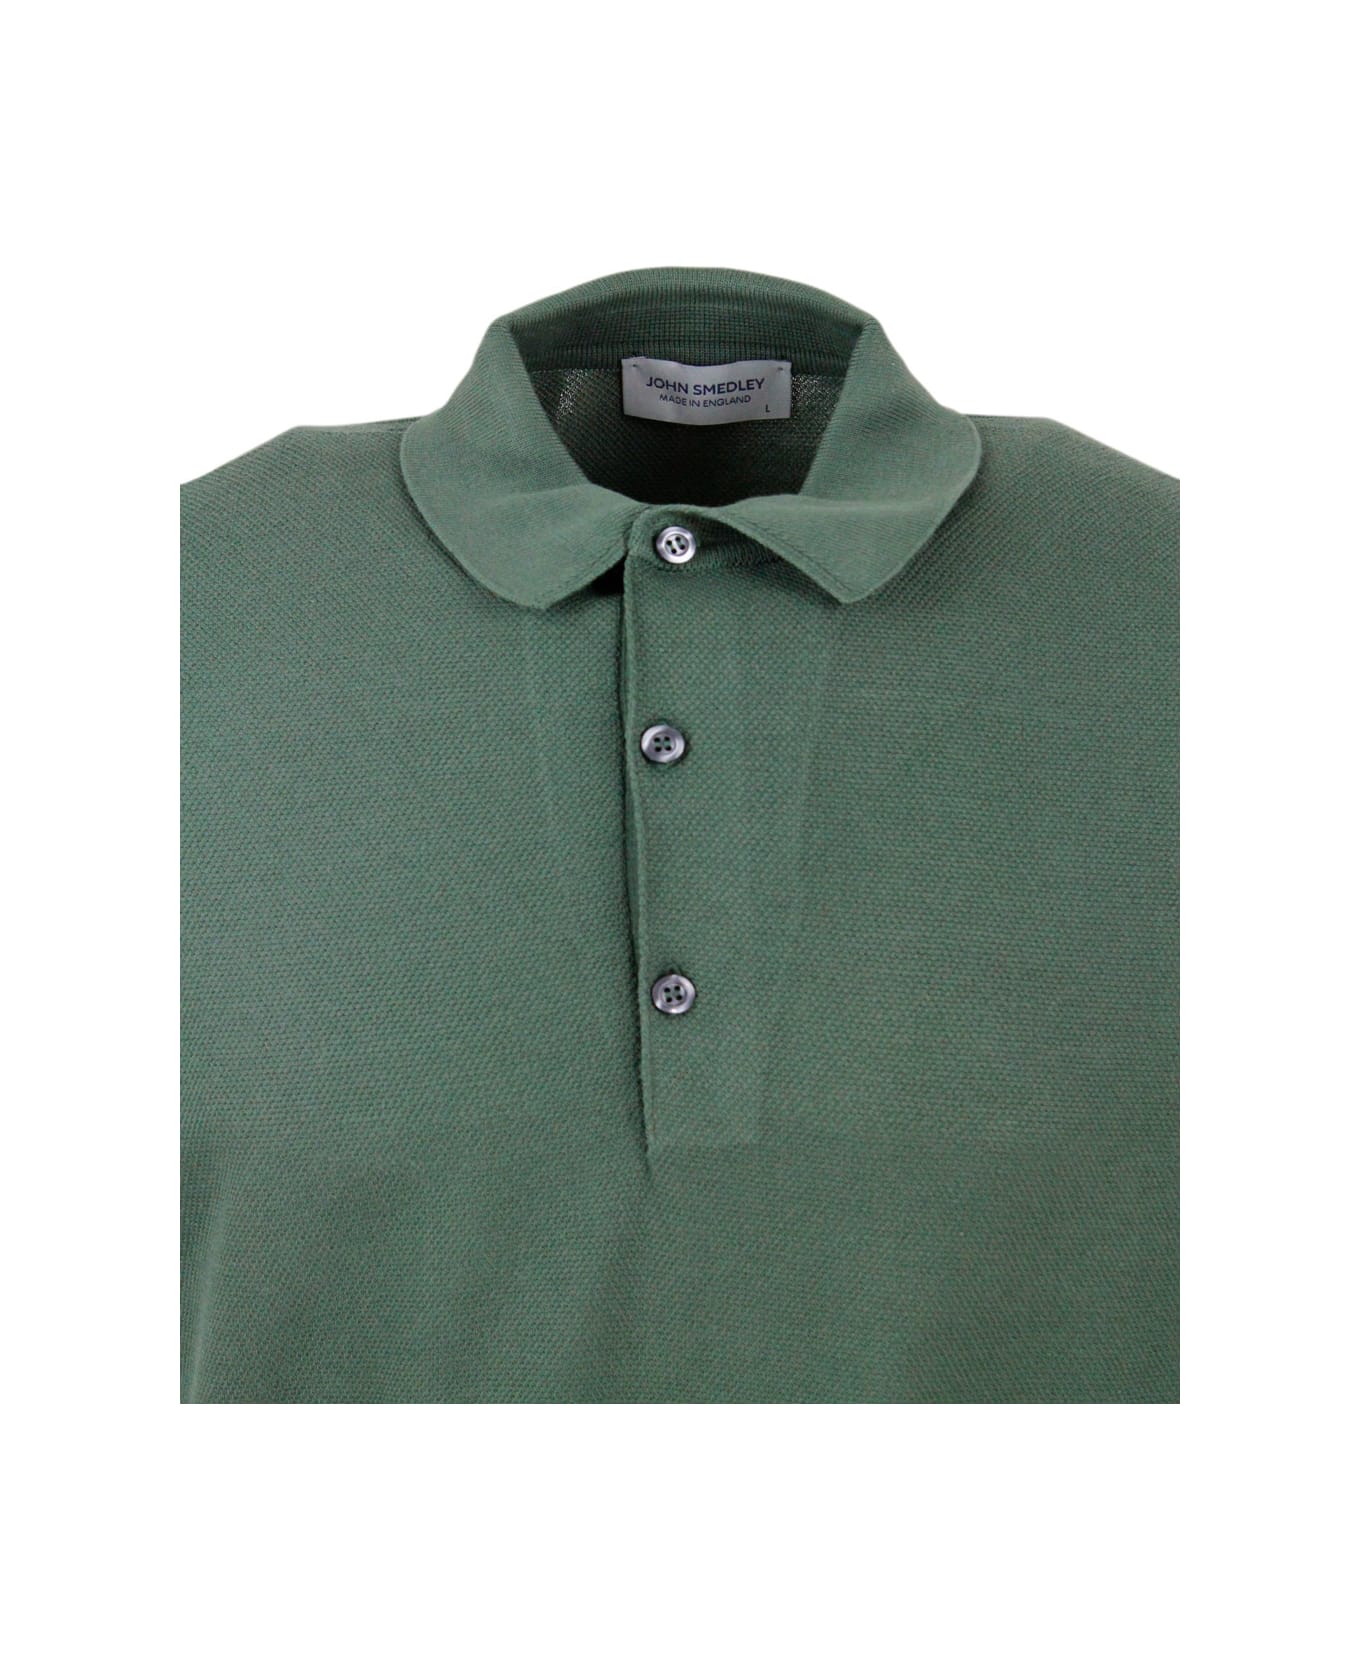 John Smedley Short-sleeved Polo Shirt In Extrafine Piqué Cotton Thread With Three Buttons - Green ポロシャツ